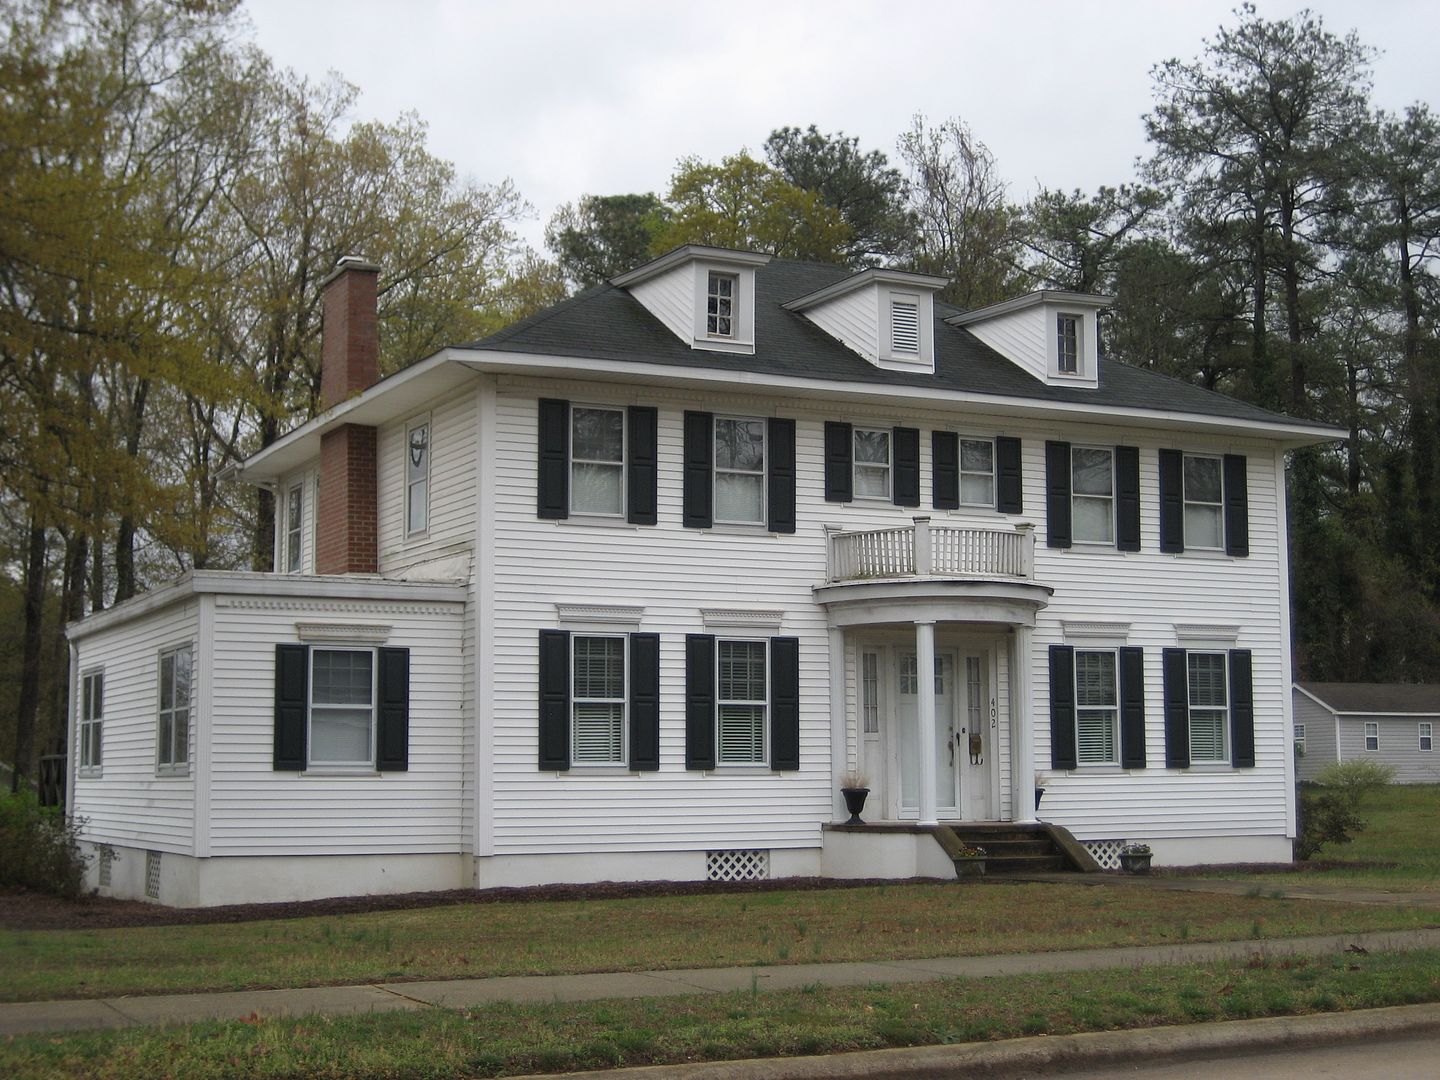 One of the best features of Roanoke Rapids is they have three of Aladdins biggest and best models, such as the Villa, the Brentwood and this house, The Colonial.